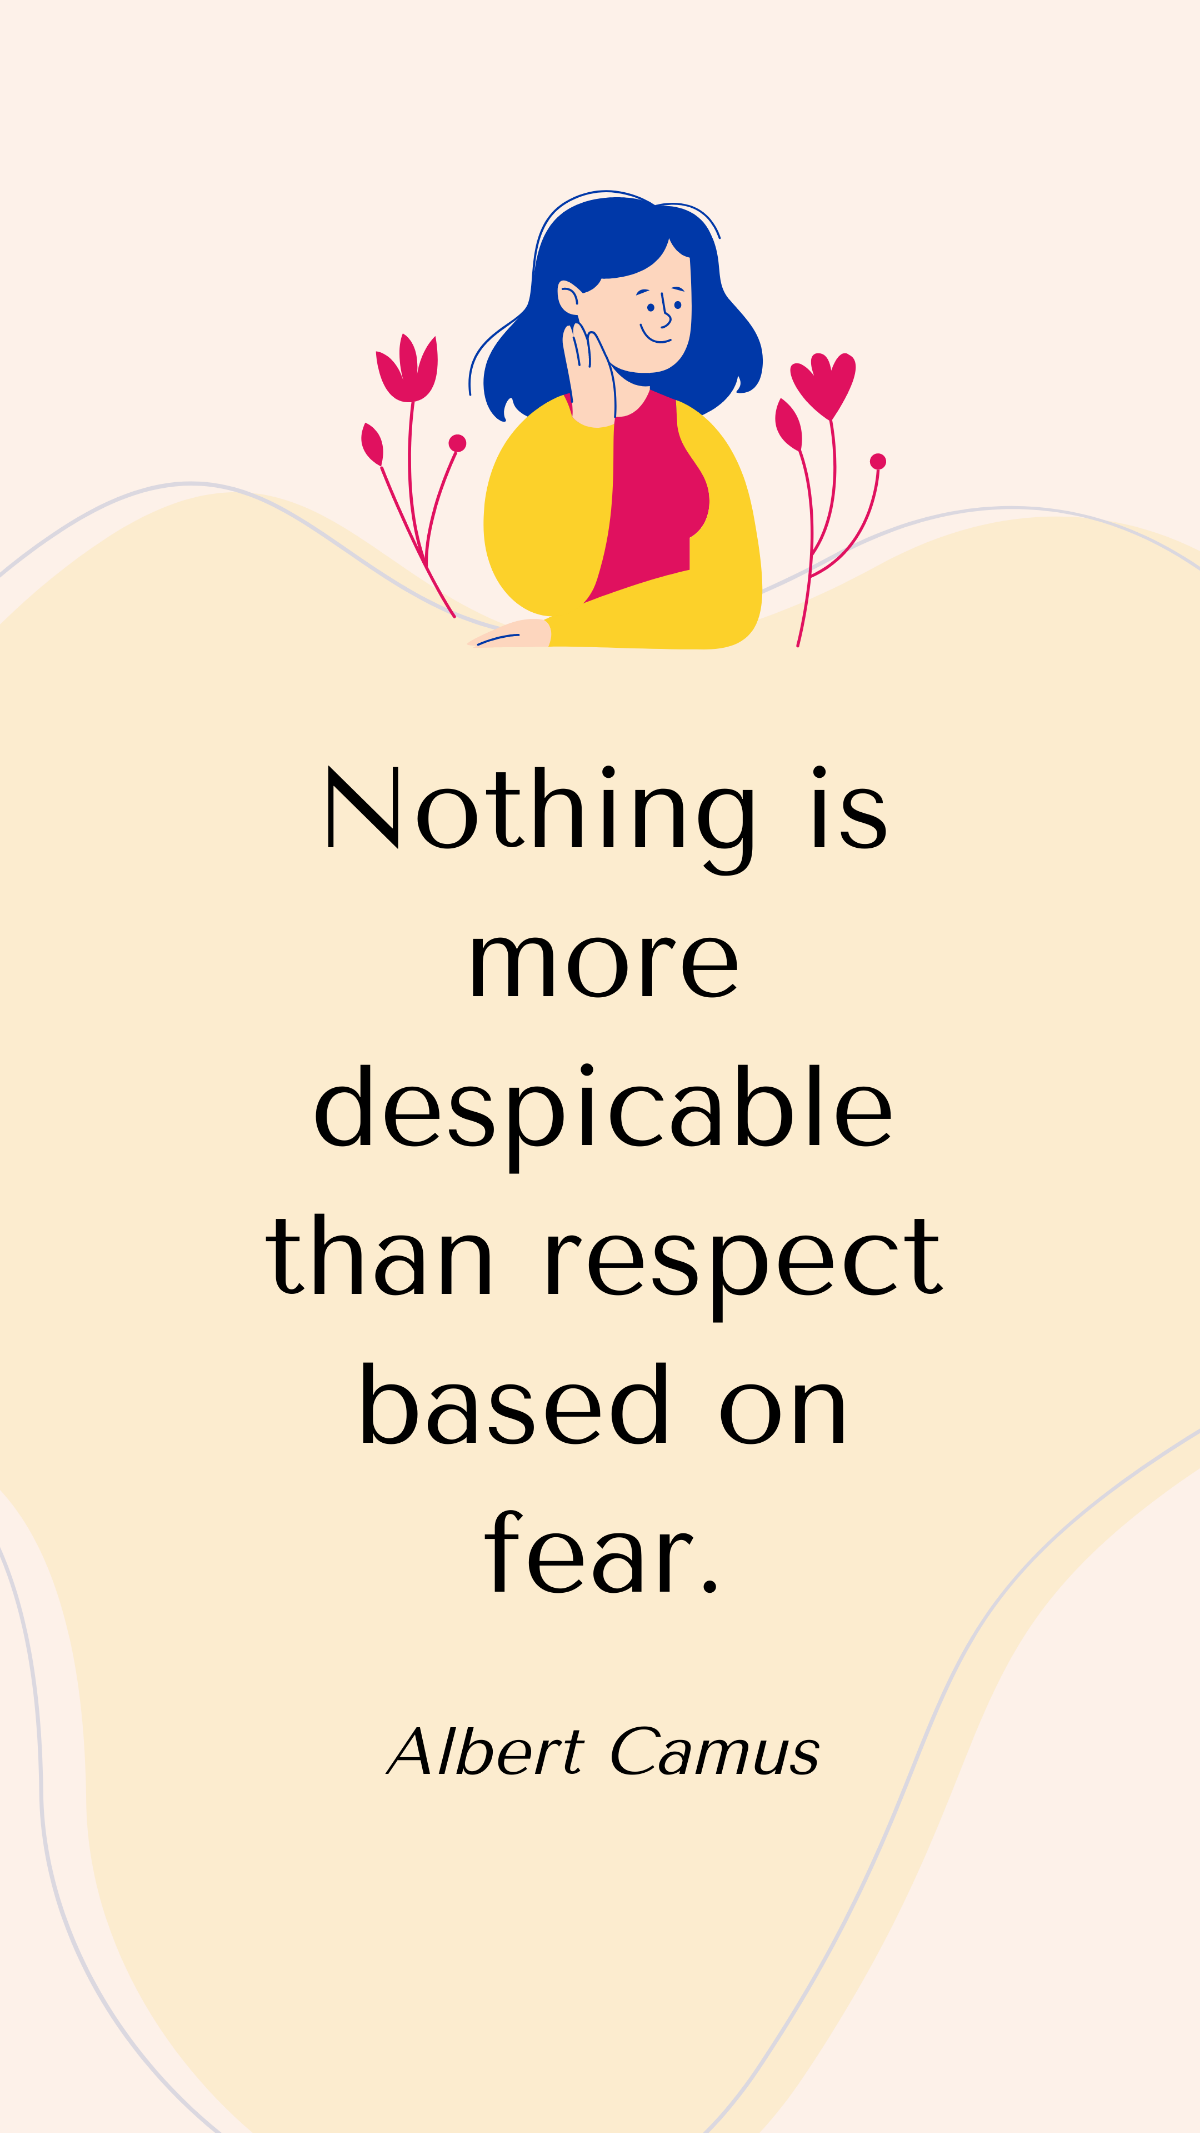 Albert Camus - Nothing is more despicable than respect based on fear. Template